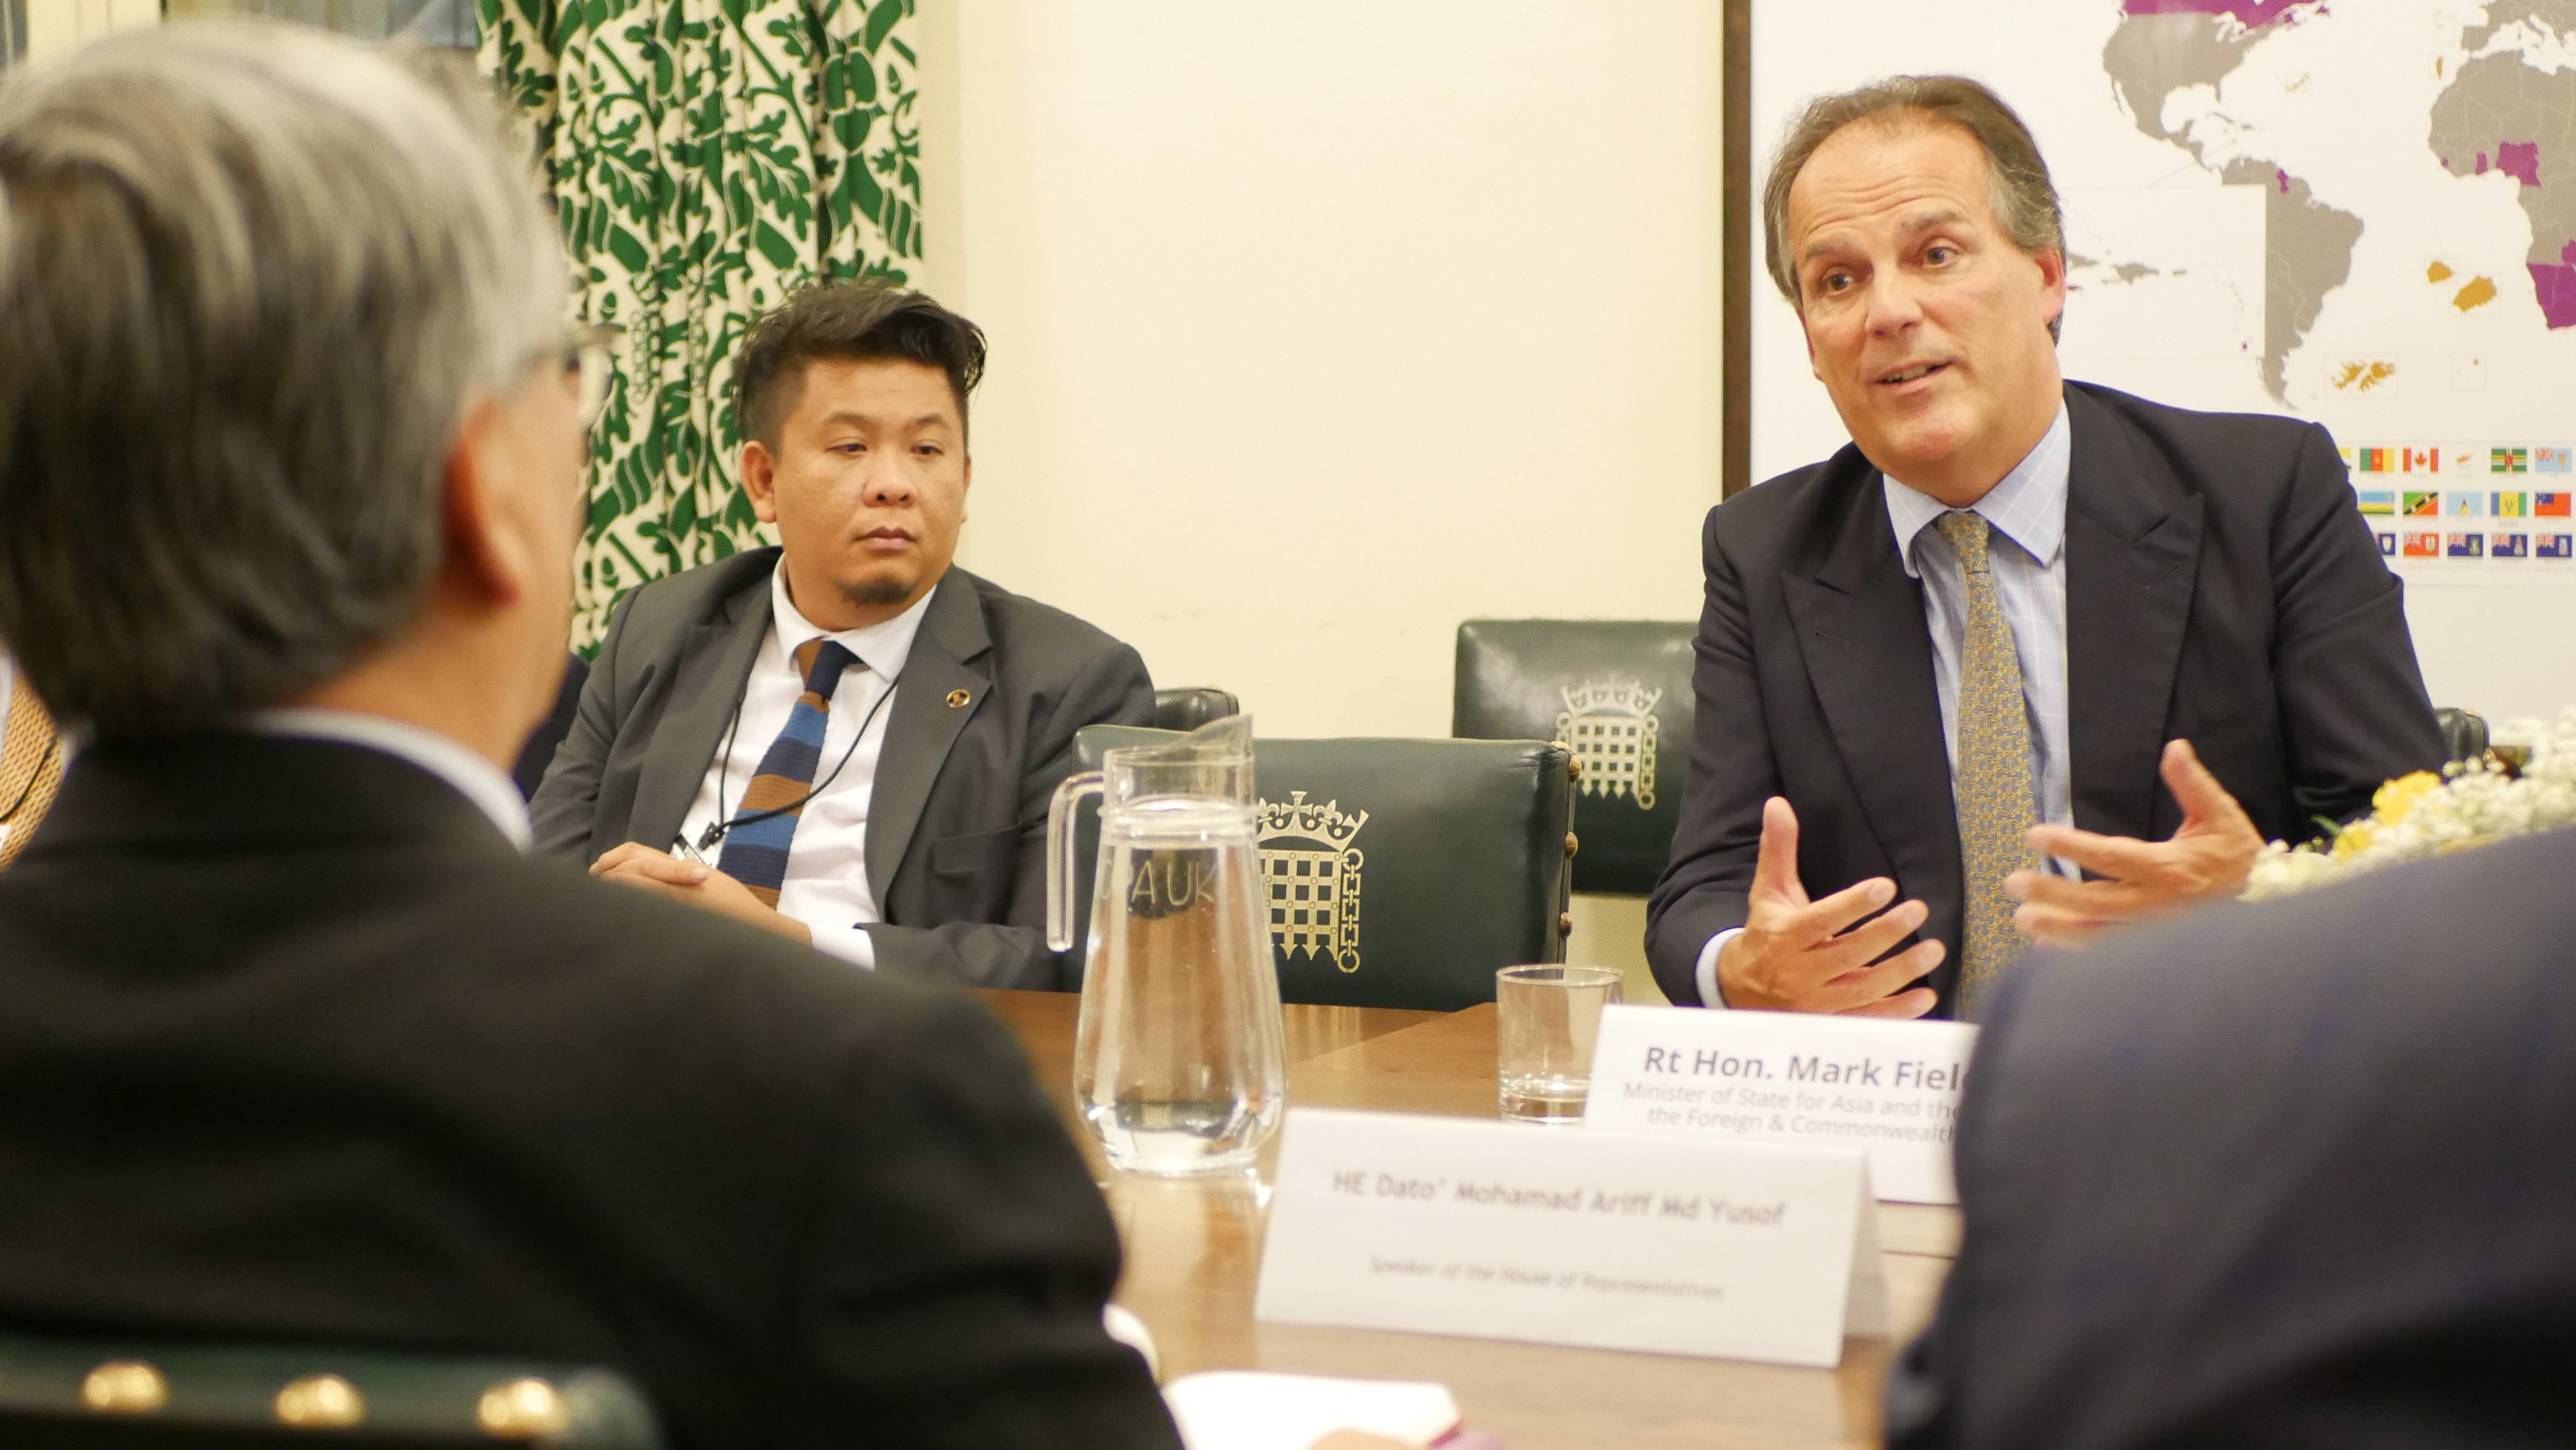 The delegation meet with Rt Hon. Mark Field MP, Minister of State at the Foreign and Commonwealth Office